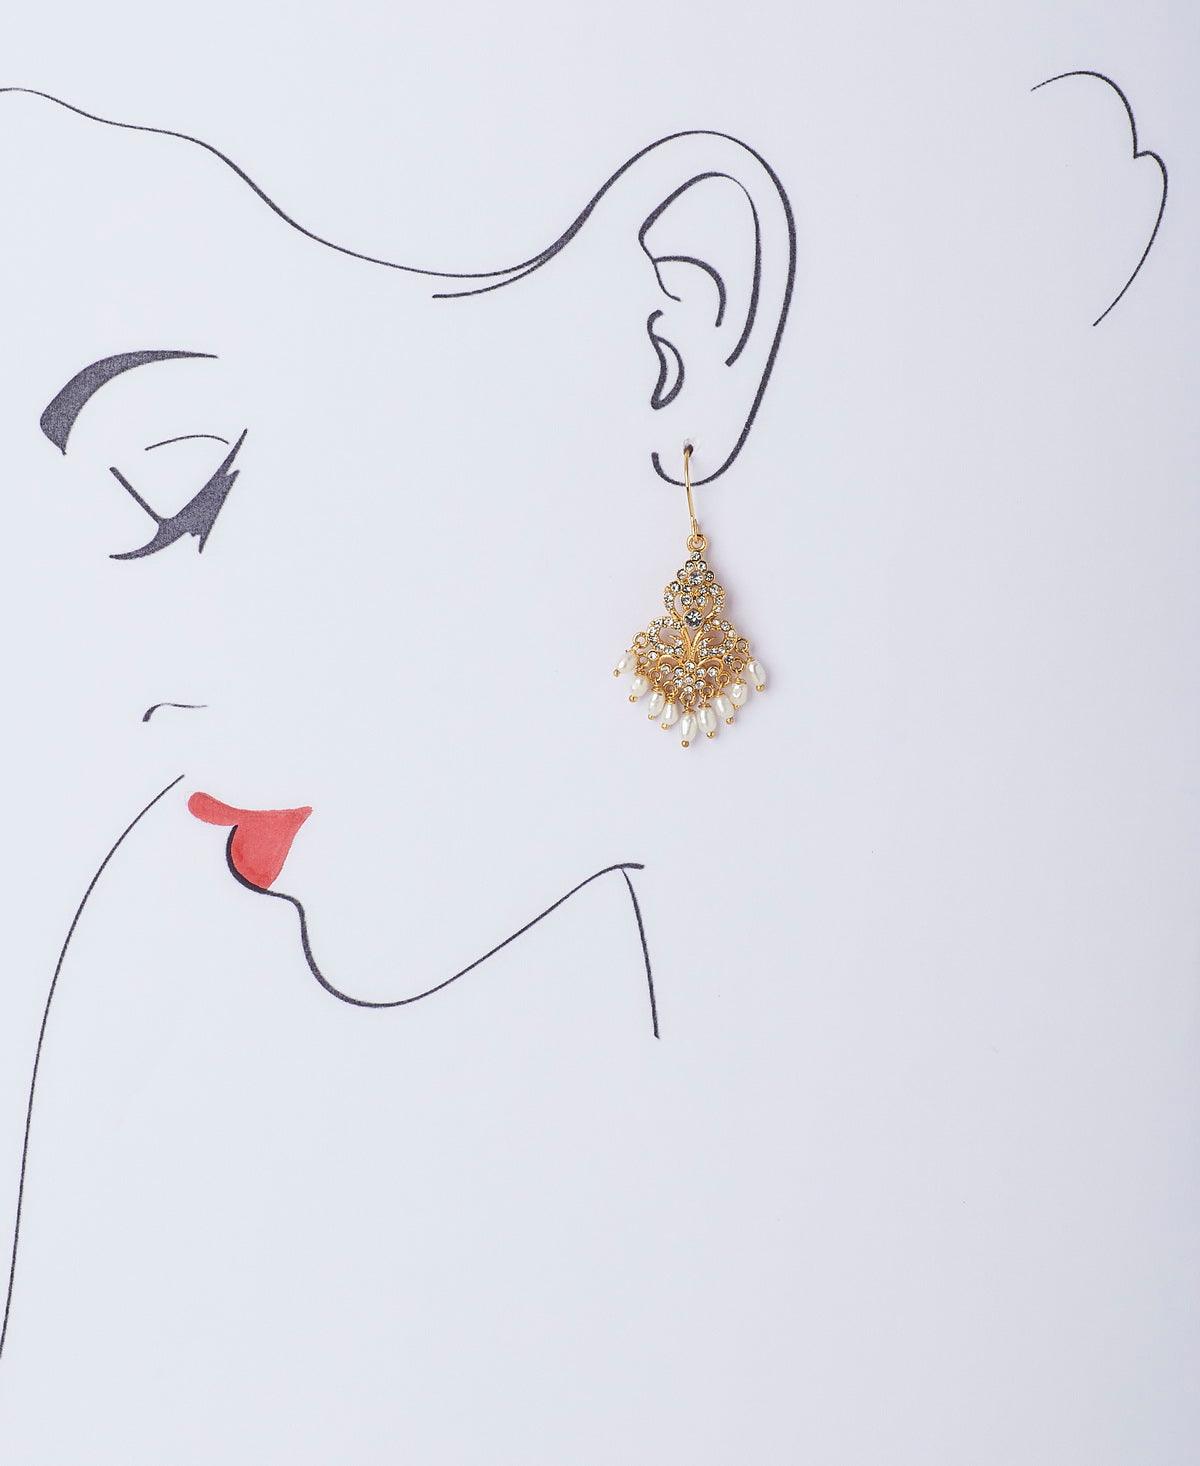 Delicate Gold Stone Studded Pearl Drop Earrings - Chandrani Pearls